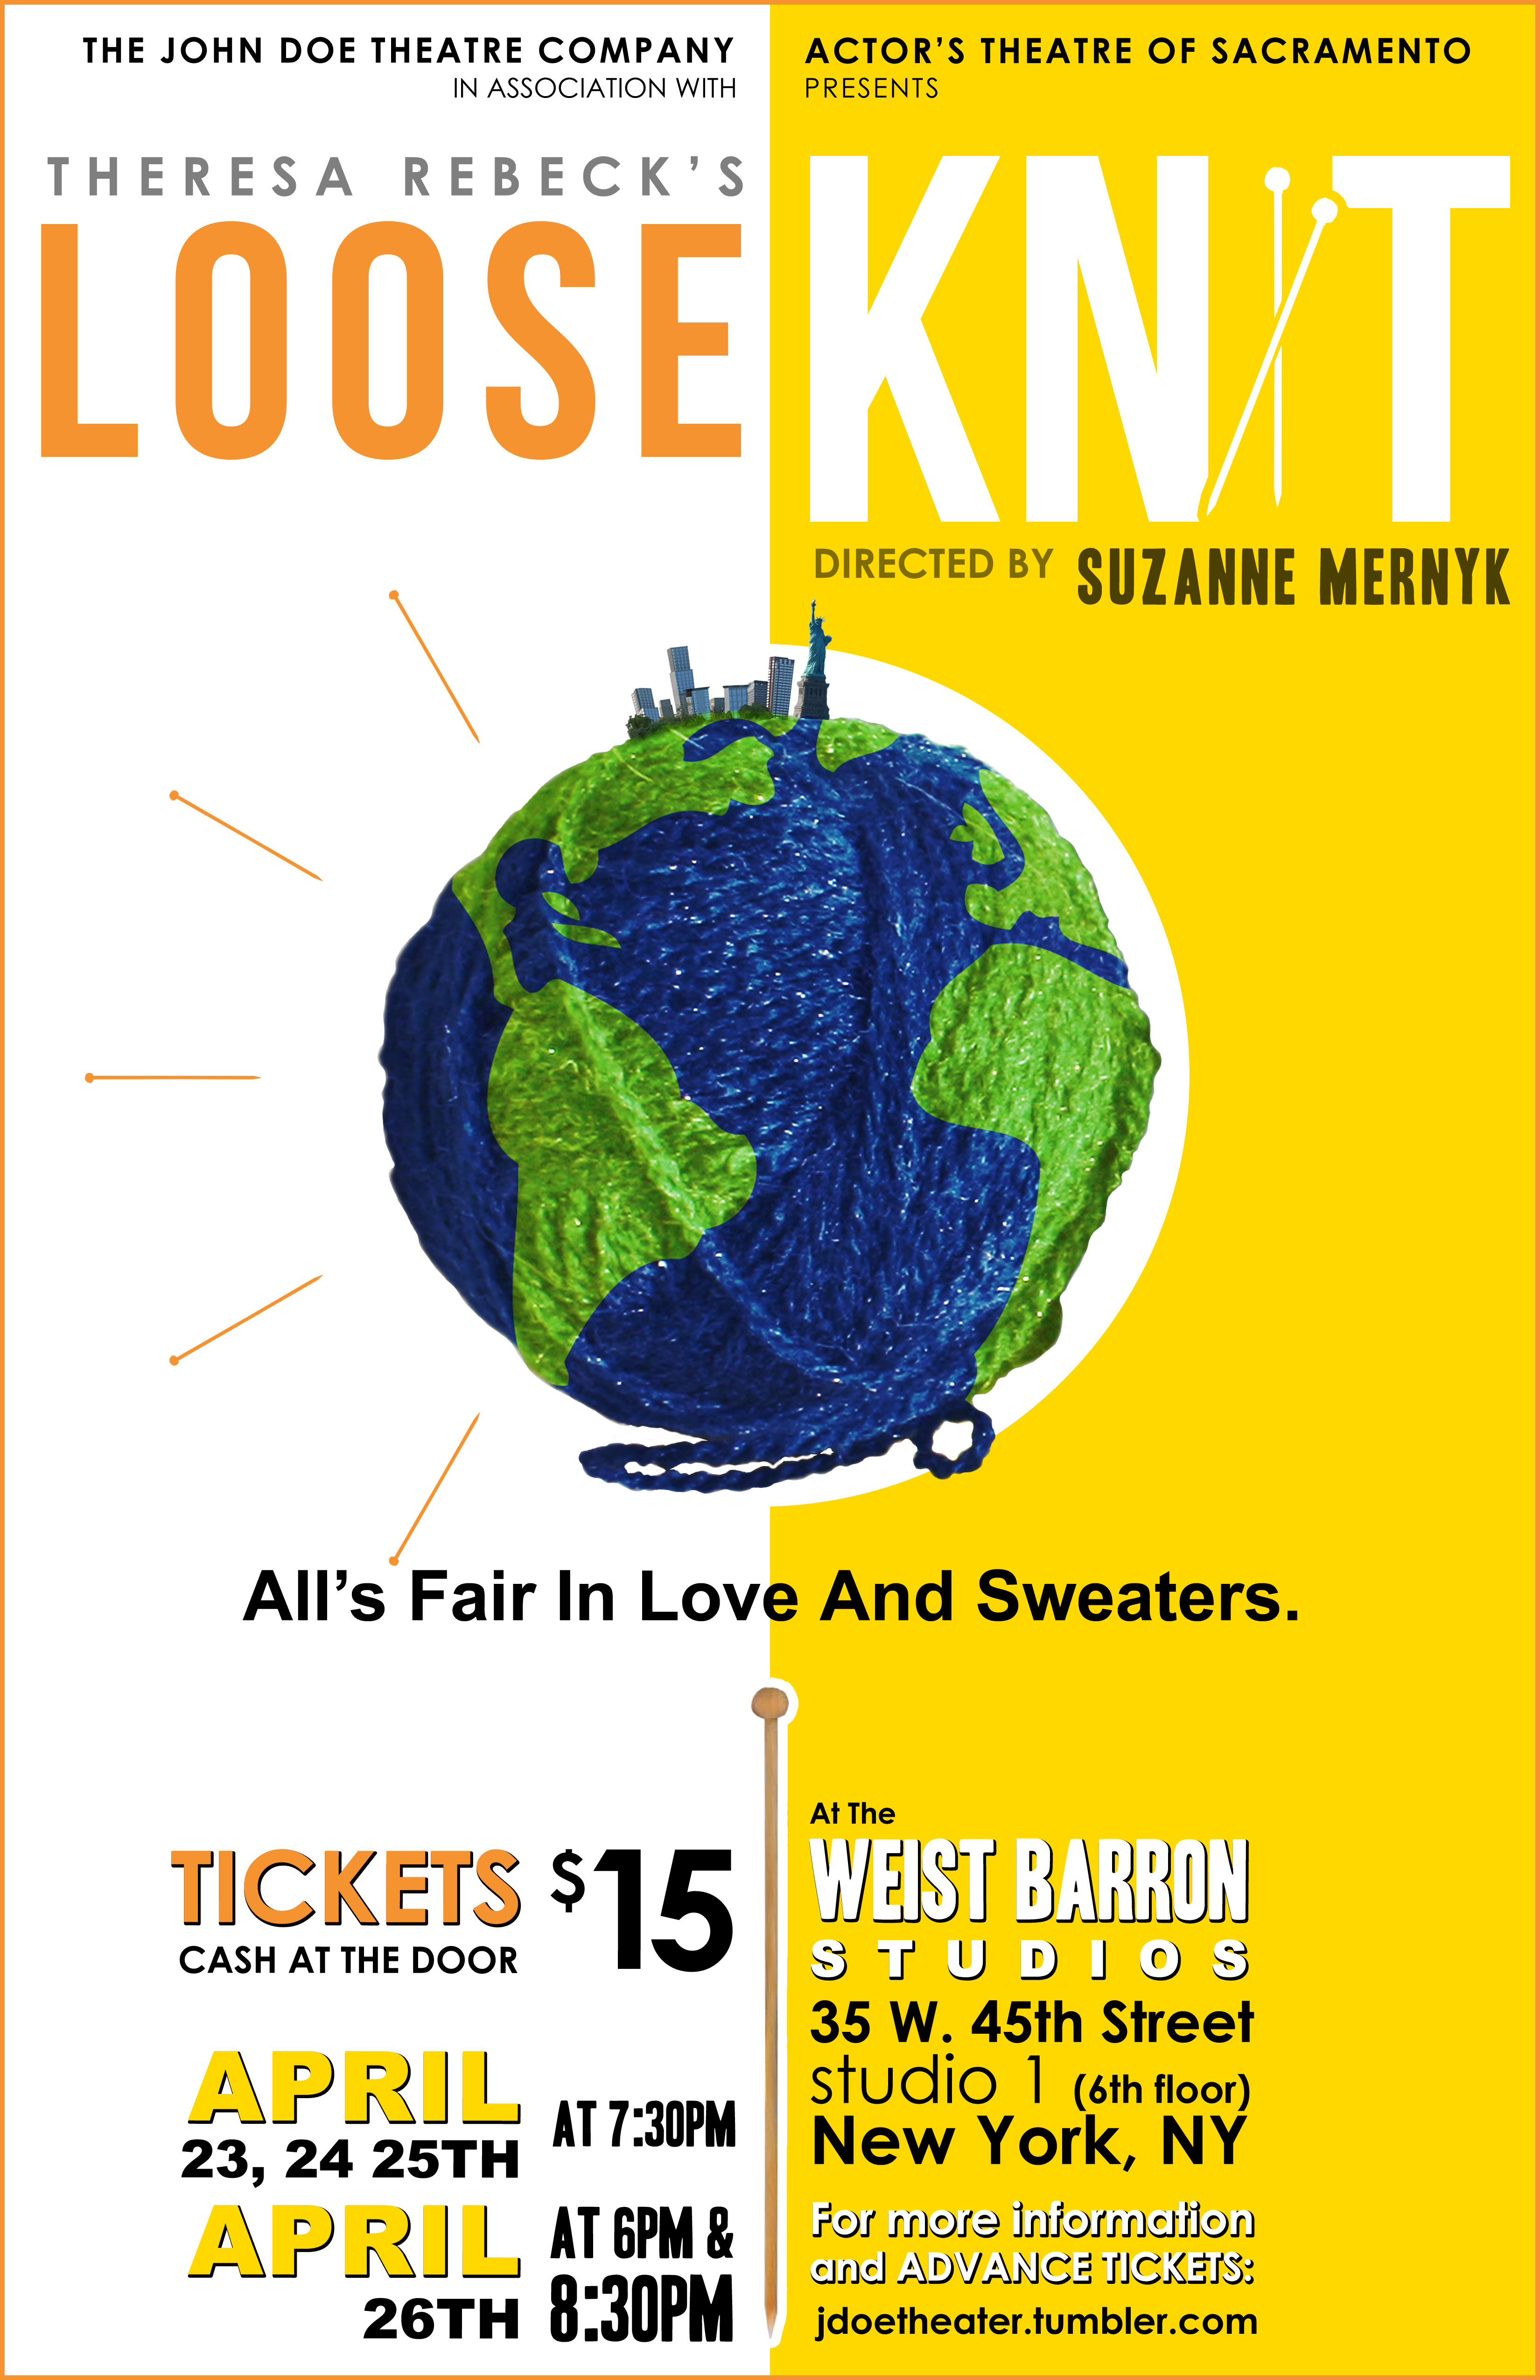 loose knit poster 4-11-14